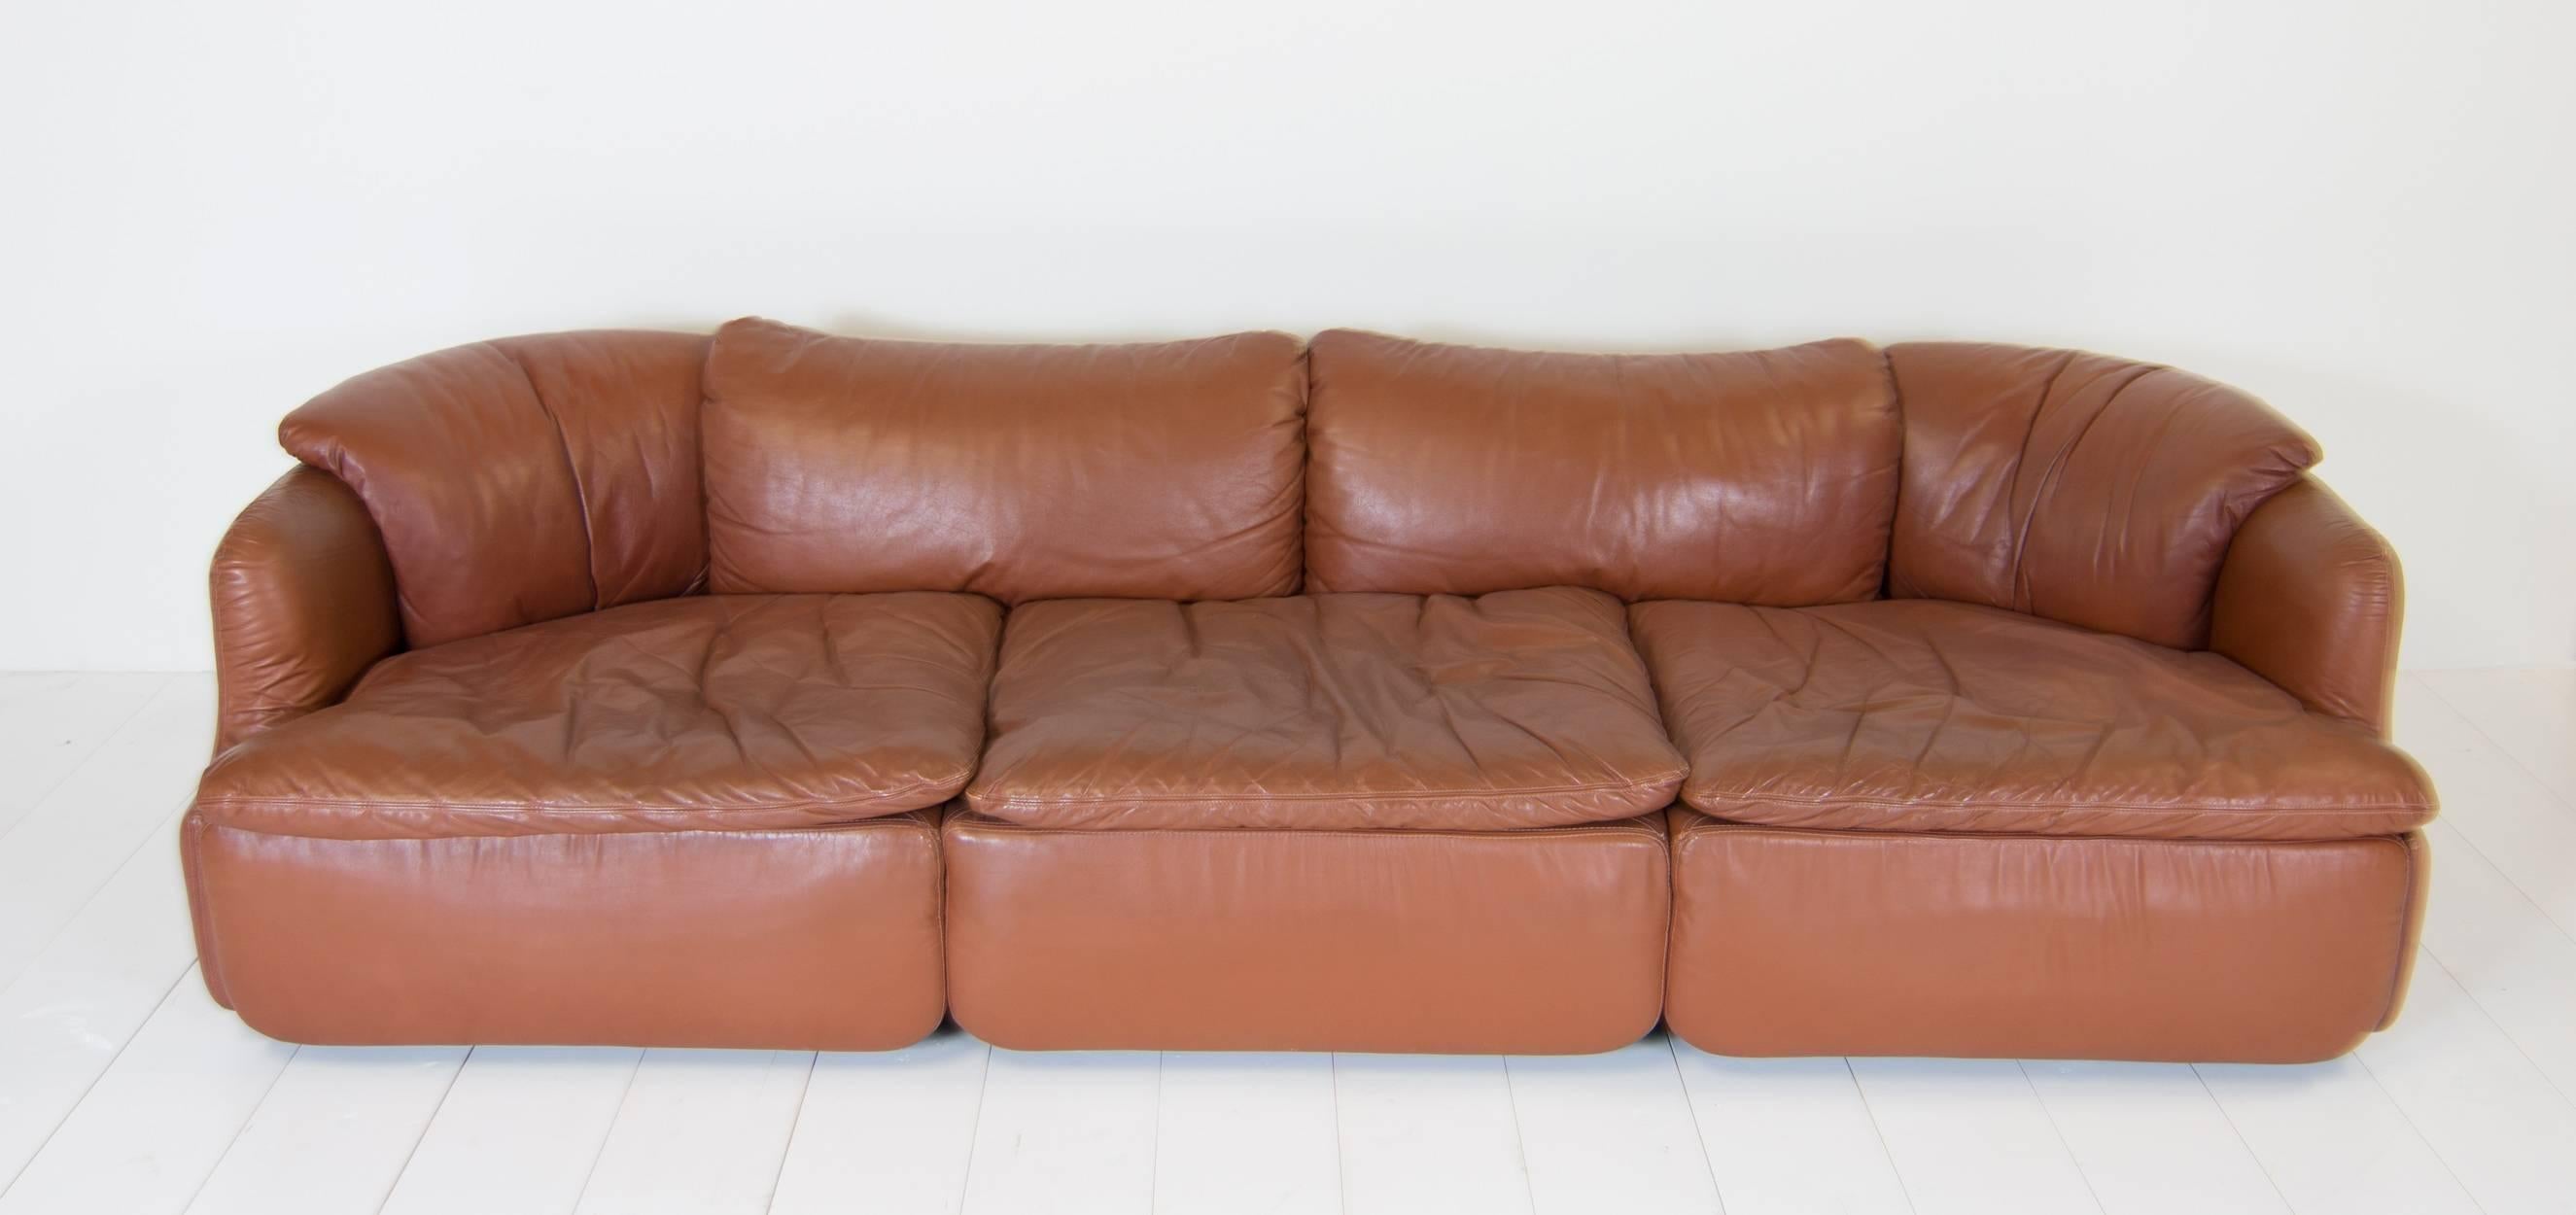 This Saporiti sofa is designed by Alberto Rosselli. This model has the name 'Confidential'. The sofa is made with beautiful brown leather.

This sofa is designed by the Italian architect, Alberto Rosselli in 1972 for Saporiti Italia. It is one of